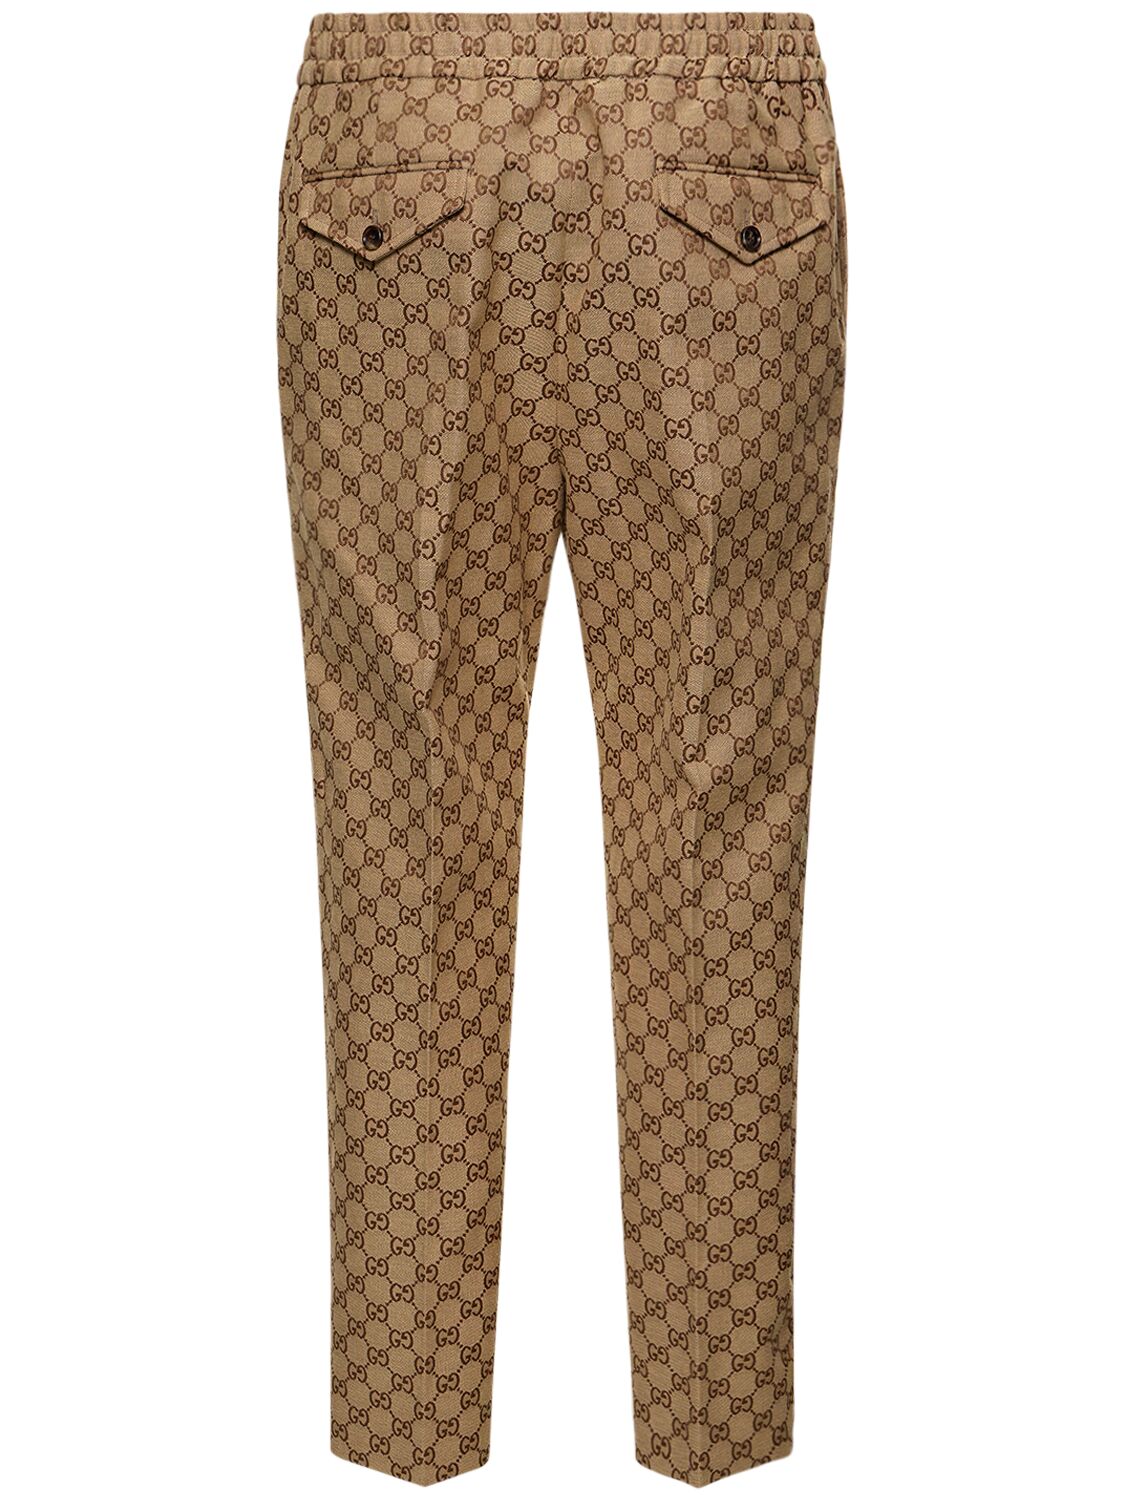 Gucci Light GG Canvas Pant, Size 46 It, Black, Ready-to-wear